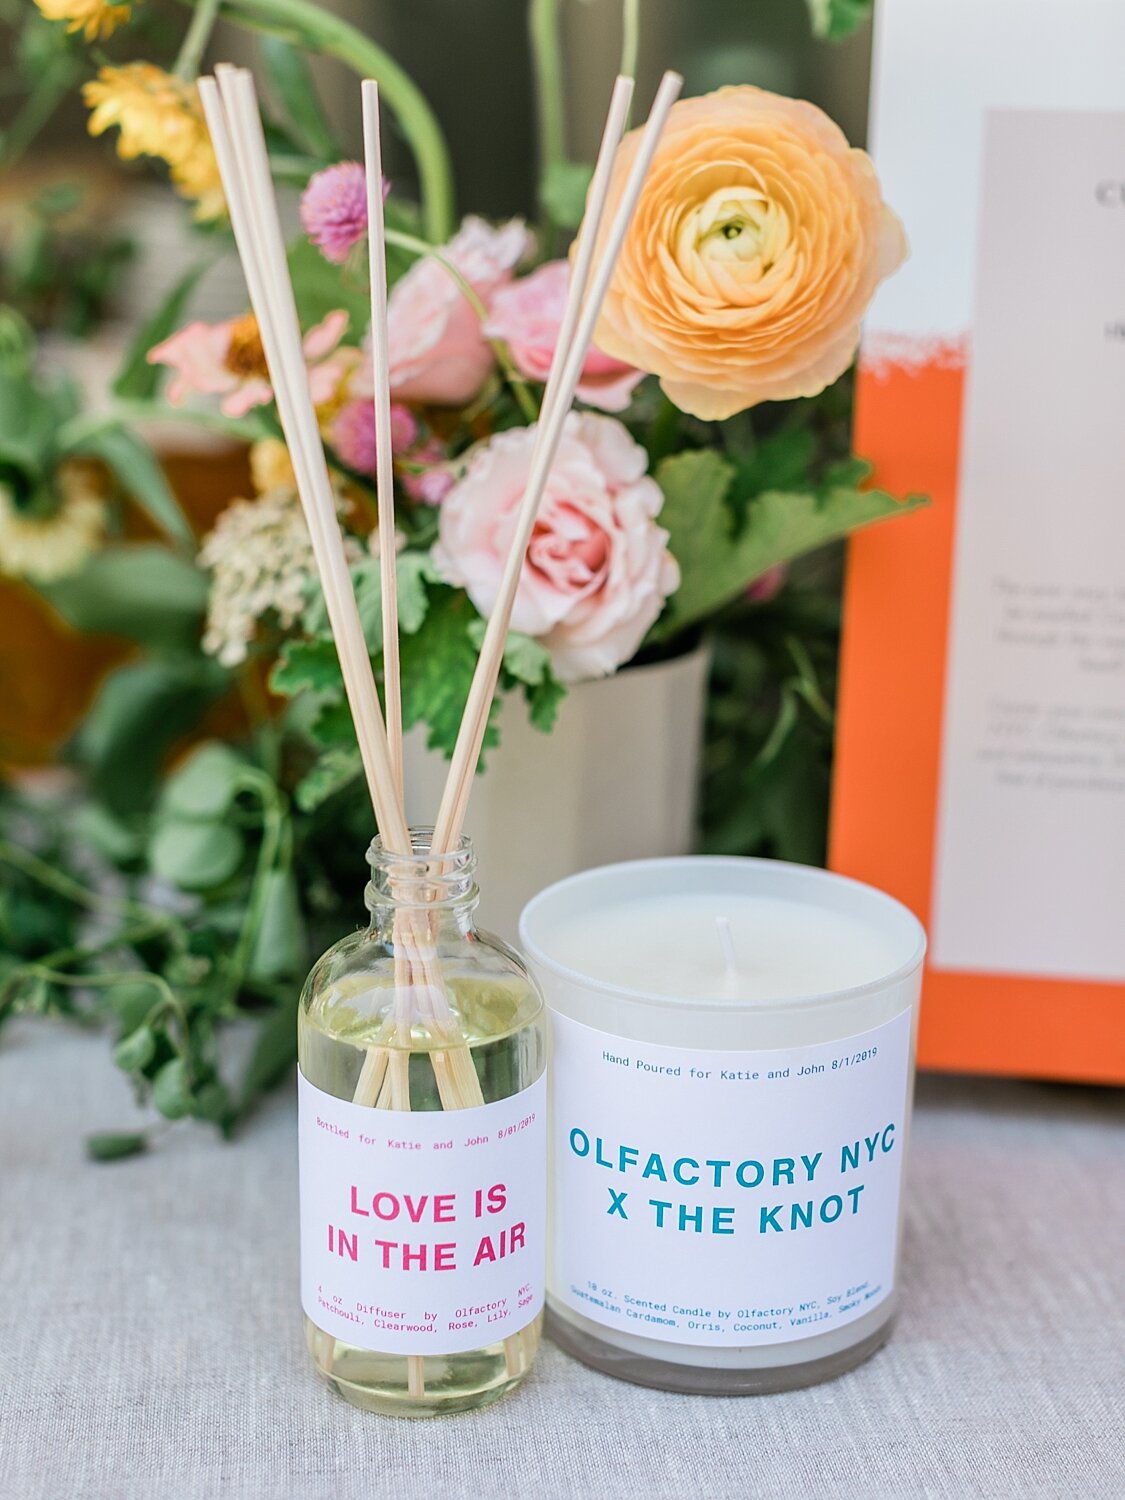 make your own candle scents with The Knot